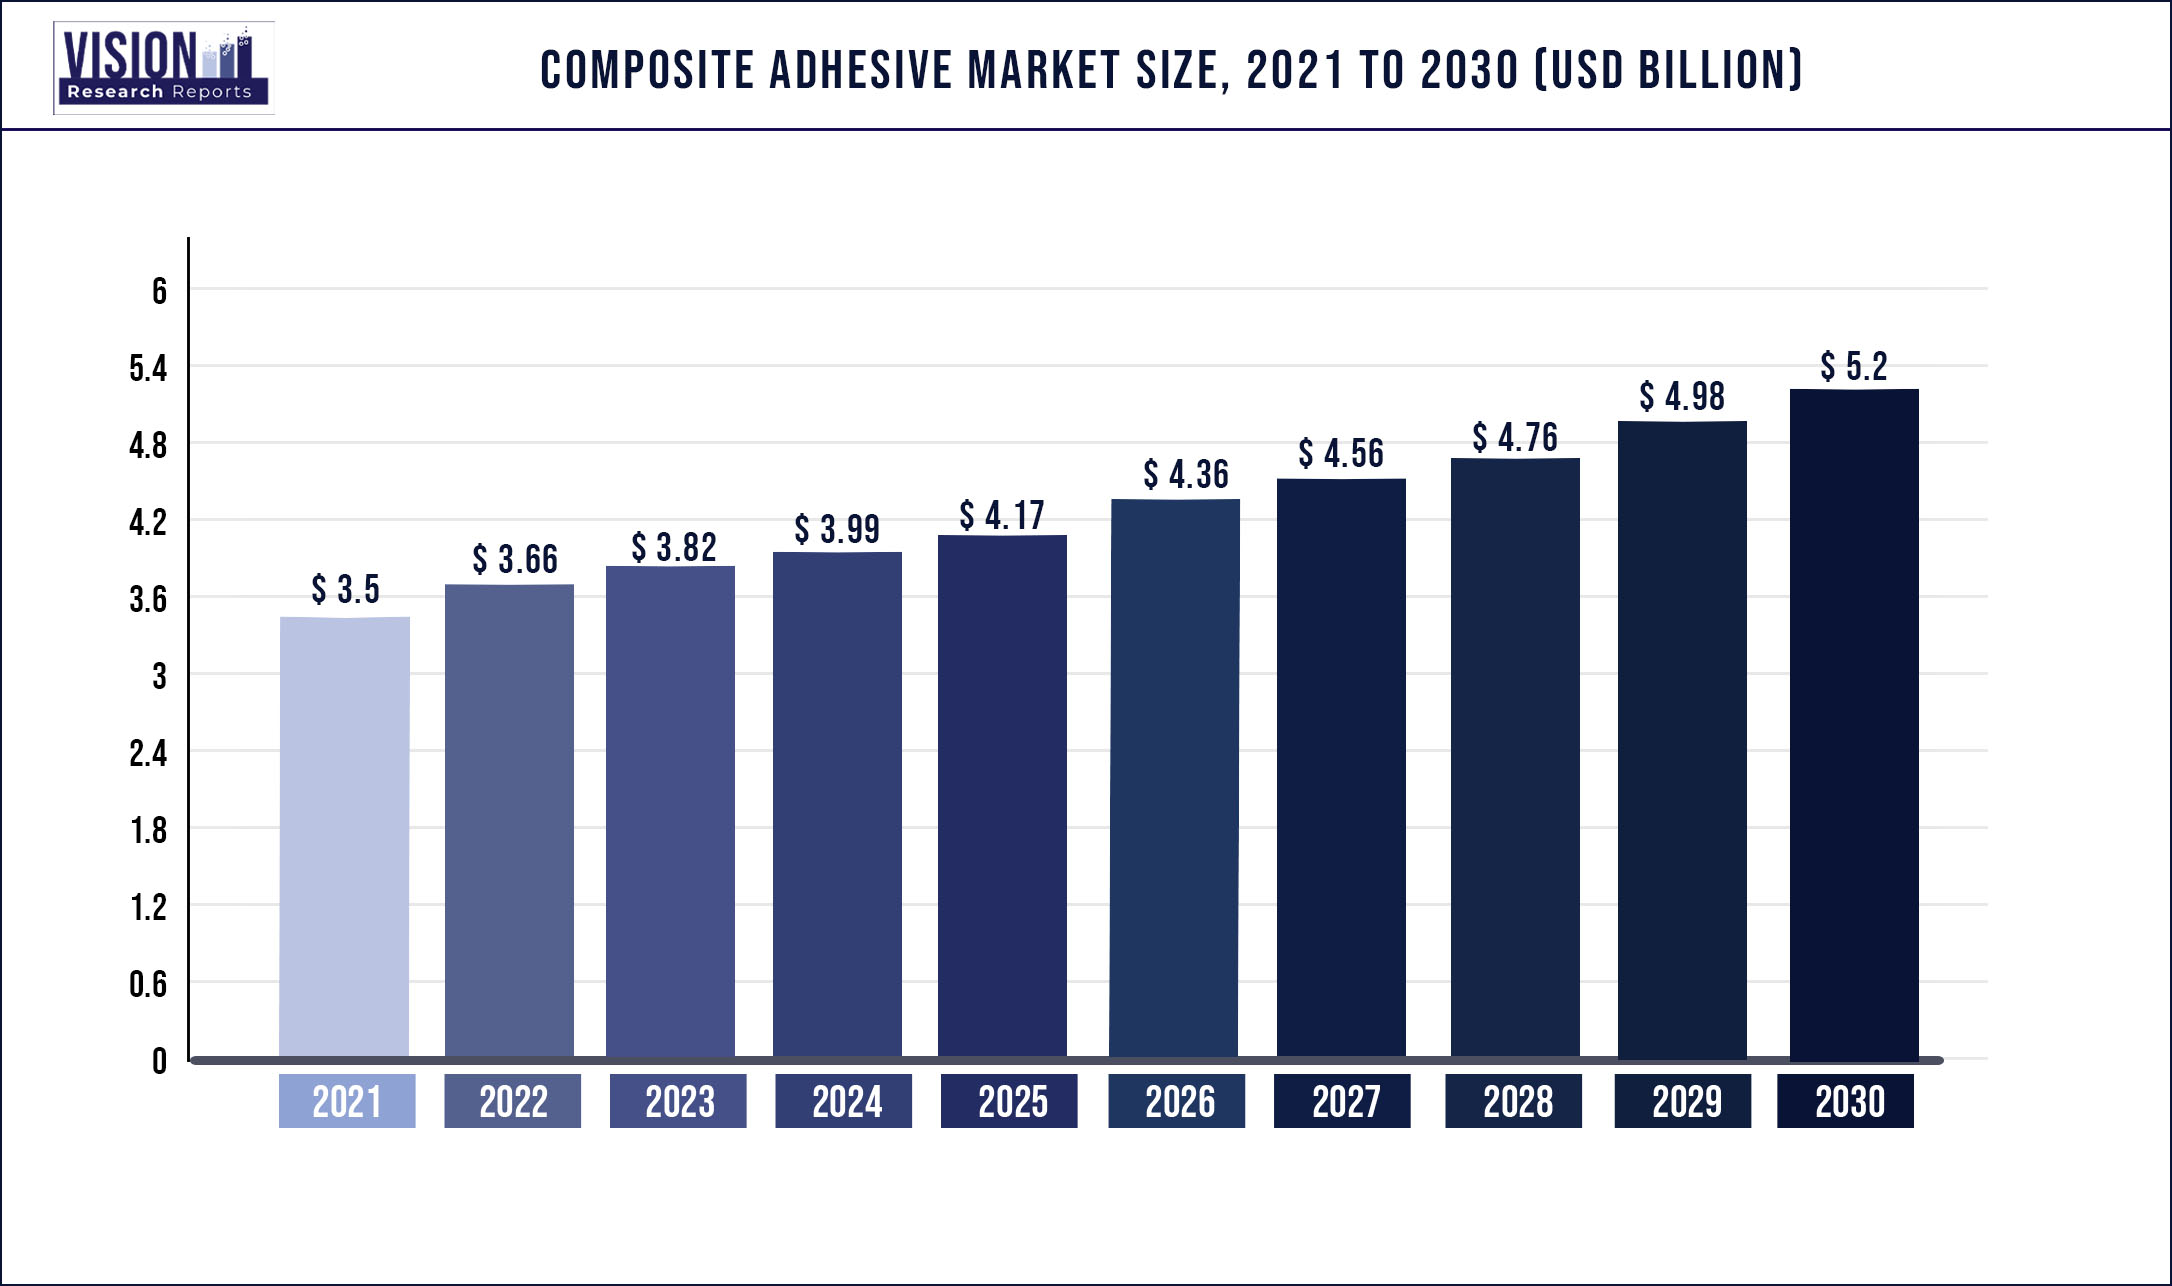 Composite Adhesive Market Size 2021 to 2030